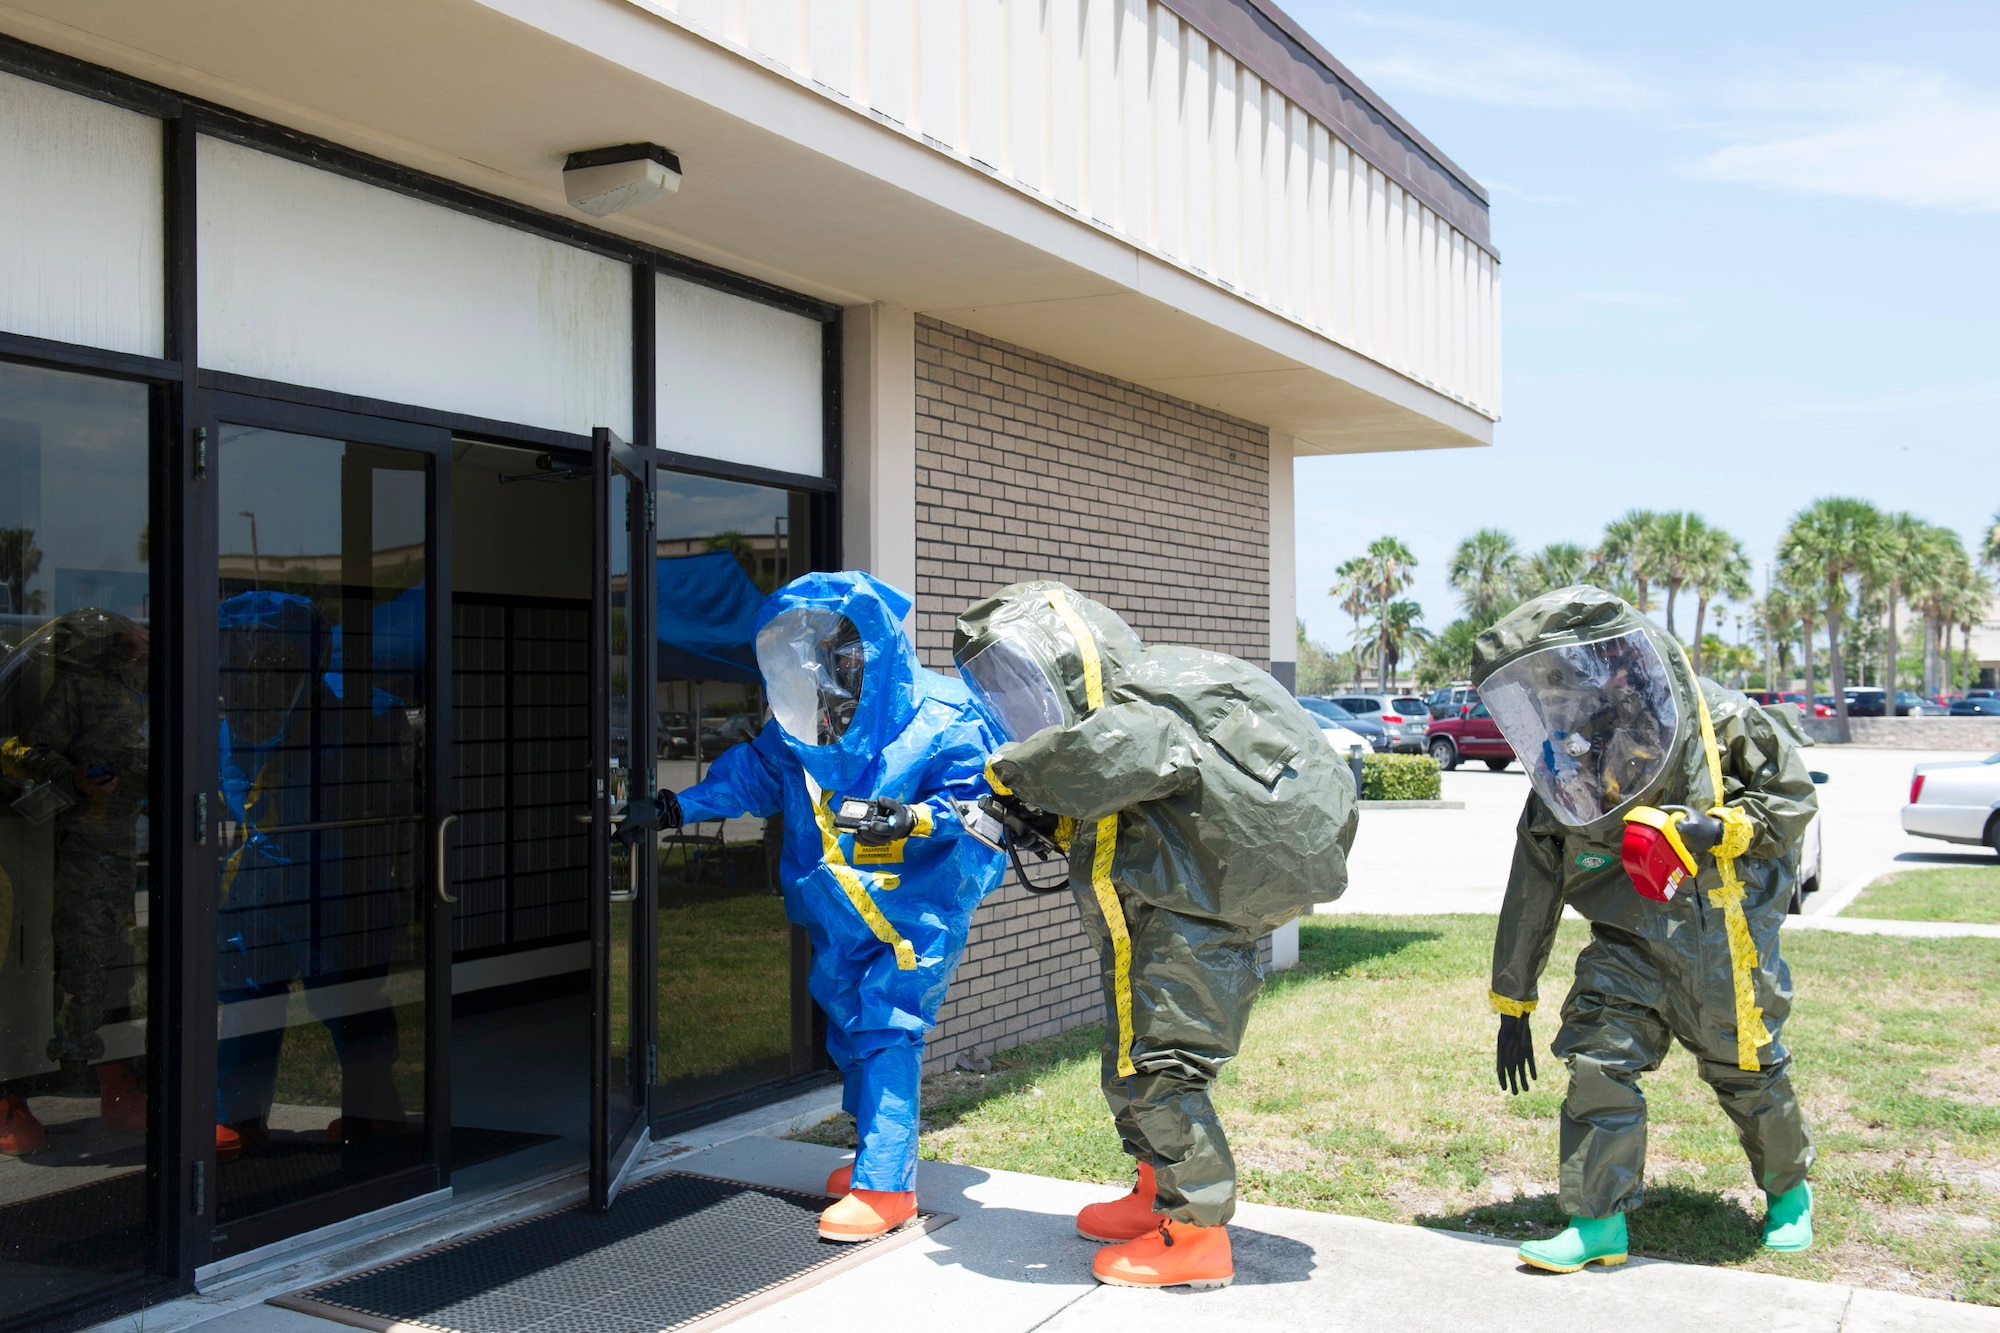 Members of 45th Medical Group's bioenvironmental flight suit up for training and respond to a simulated incident at the Patrick Air Force Base Post Office June 29, 2016. Their goal during the exercise was to train in identifying and evaluating environments that could harm personnel and families at the installation. In addition, they tested their response time and the safety equipment they are required to use when a HAZMAT threat exists. (U.S. Air Force photo by Matthew Jurgens/Released)